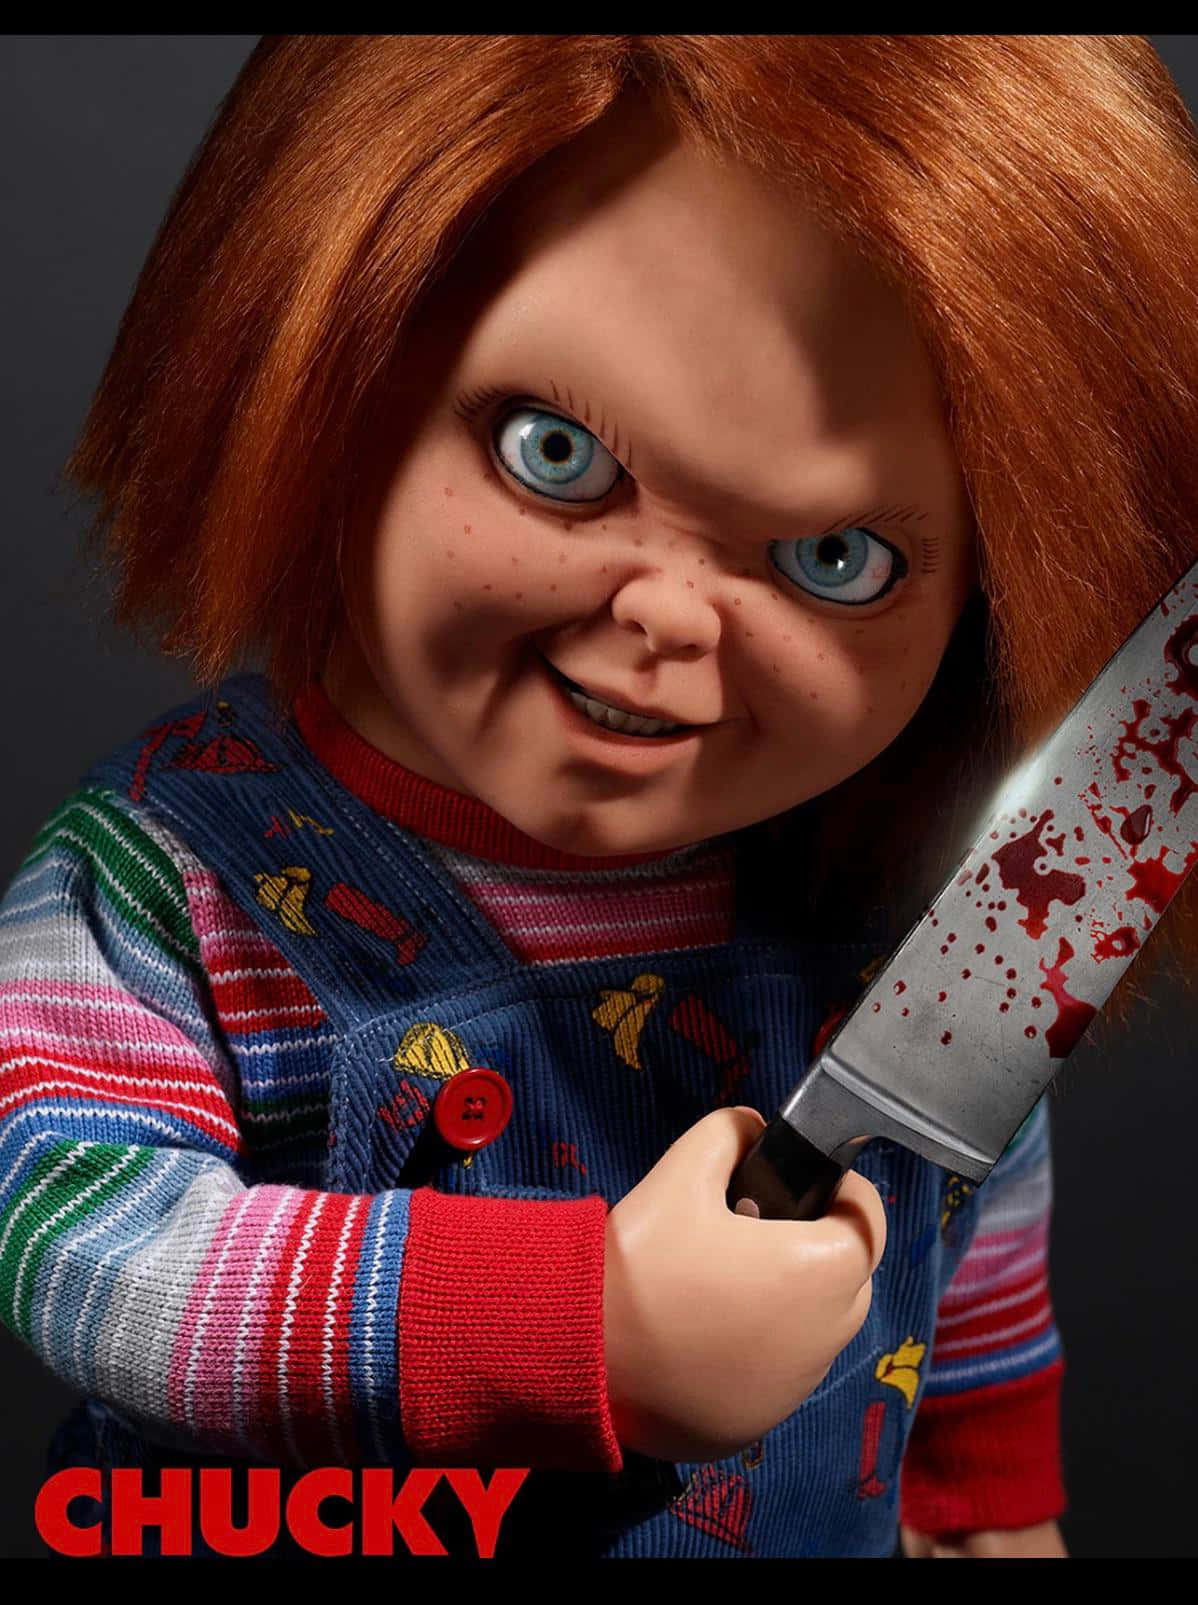 Chucky Doll With A Menacing Stare Wallpaper